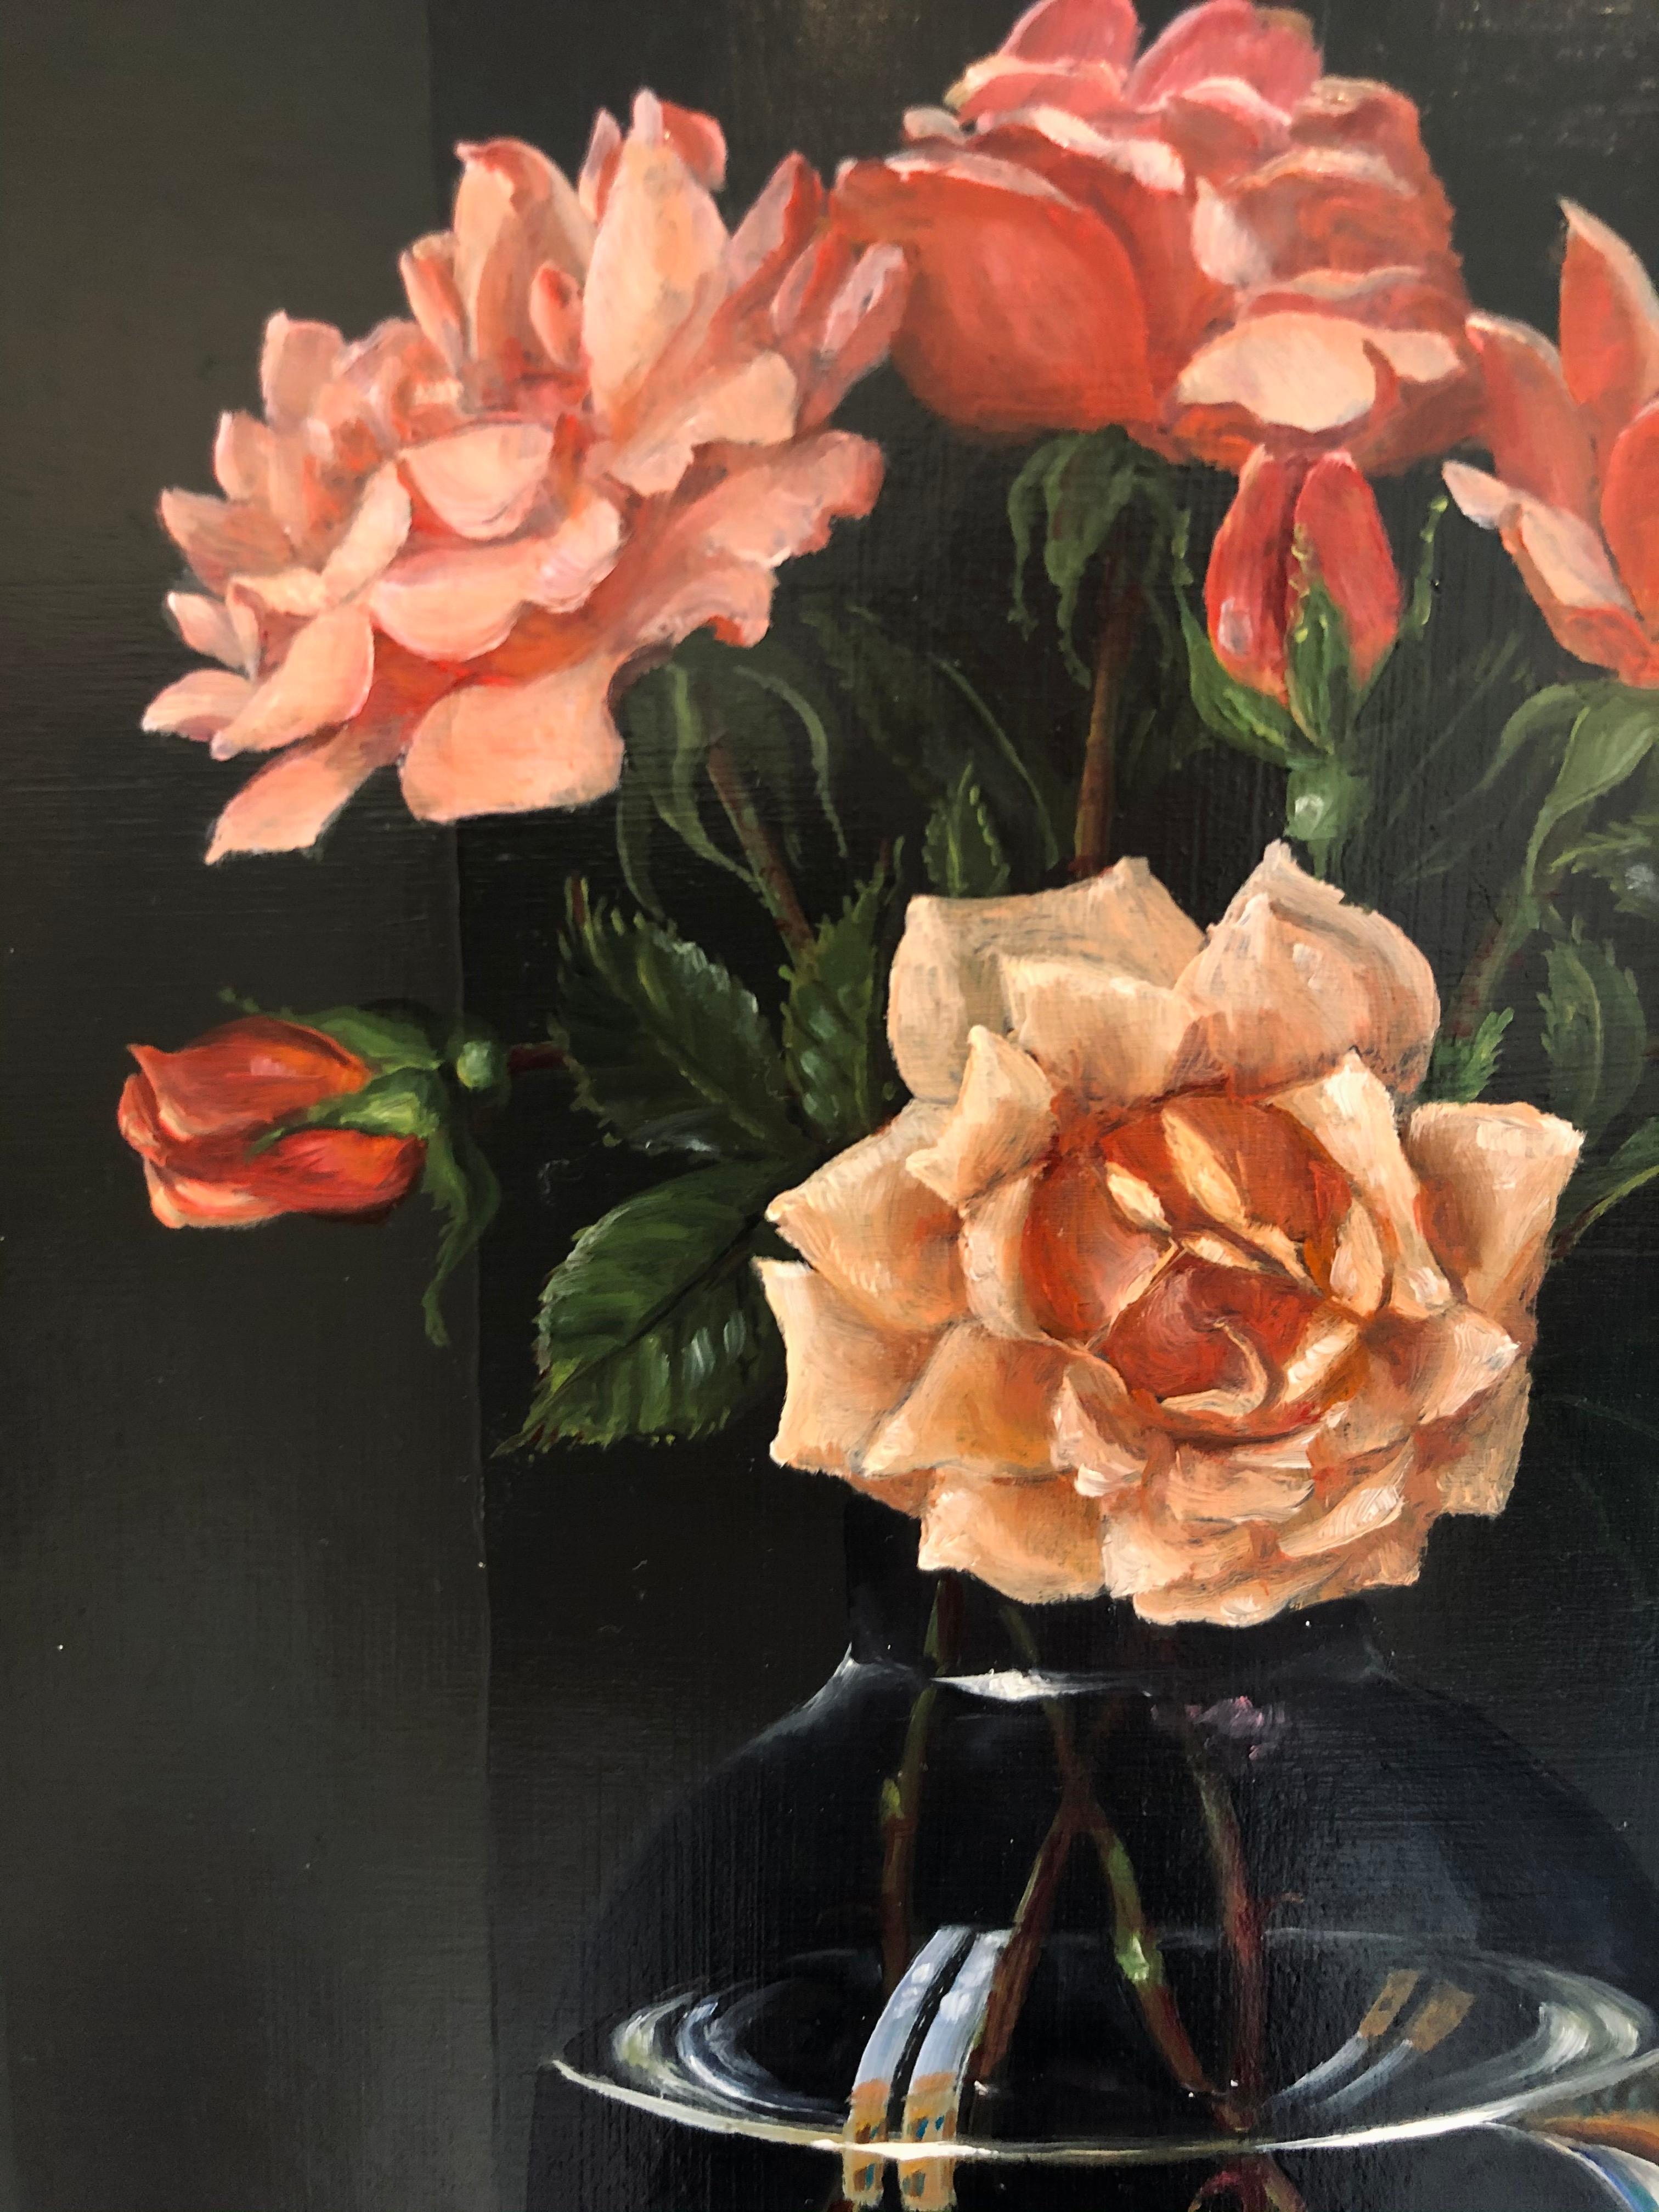 Roses from Rene-original hyper realism still life oil paintings-contemporary Art - Black Still-Life Painting by Tobias Harrison